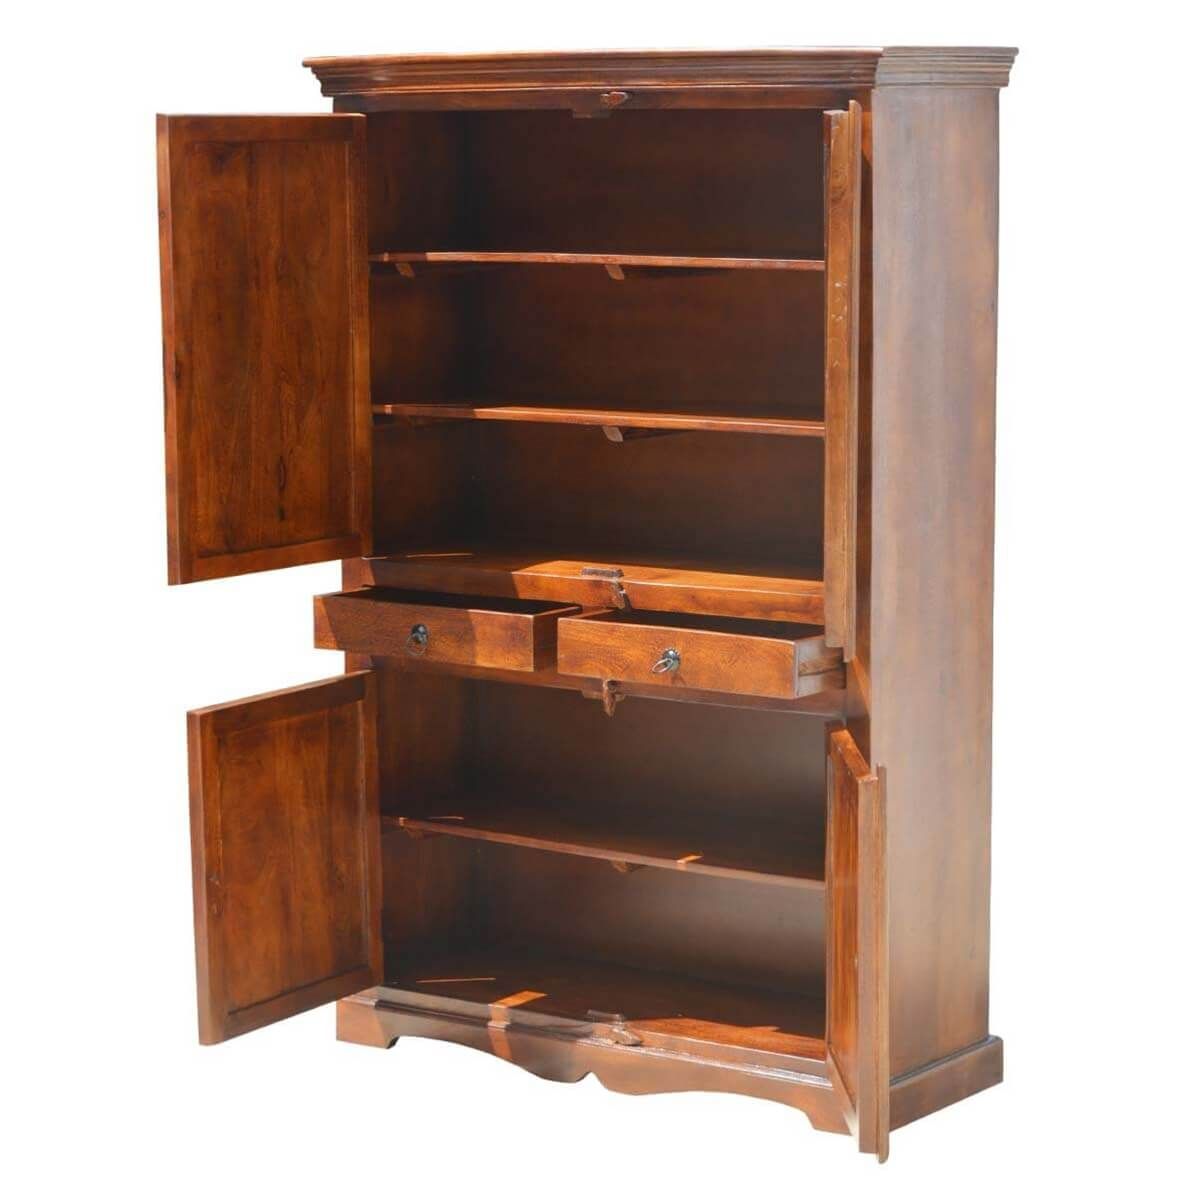 Shaker Classic Solid Mango Wood Large Tv Armoire With With Regard To Wood Tv Armoire (View 6 of 15)